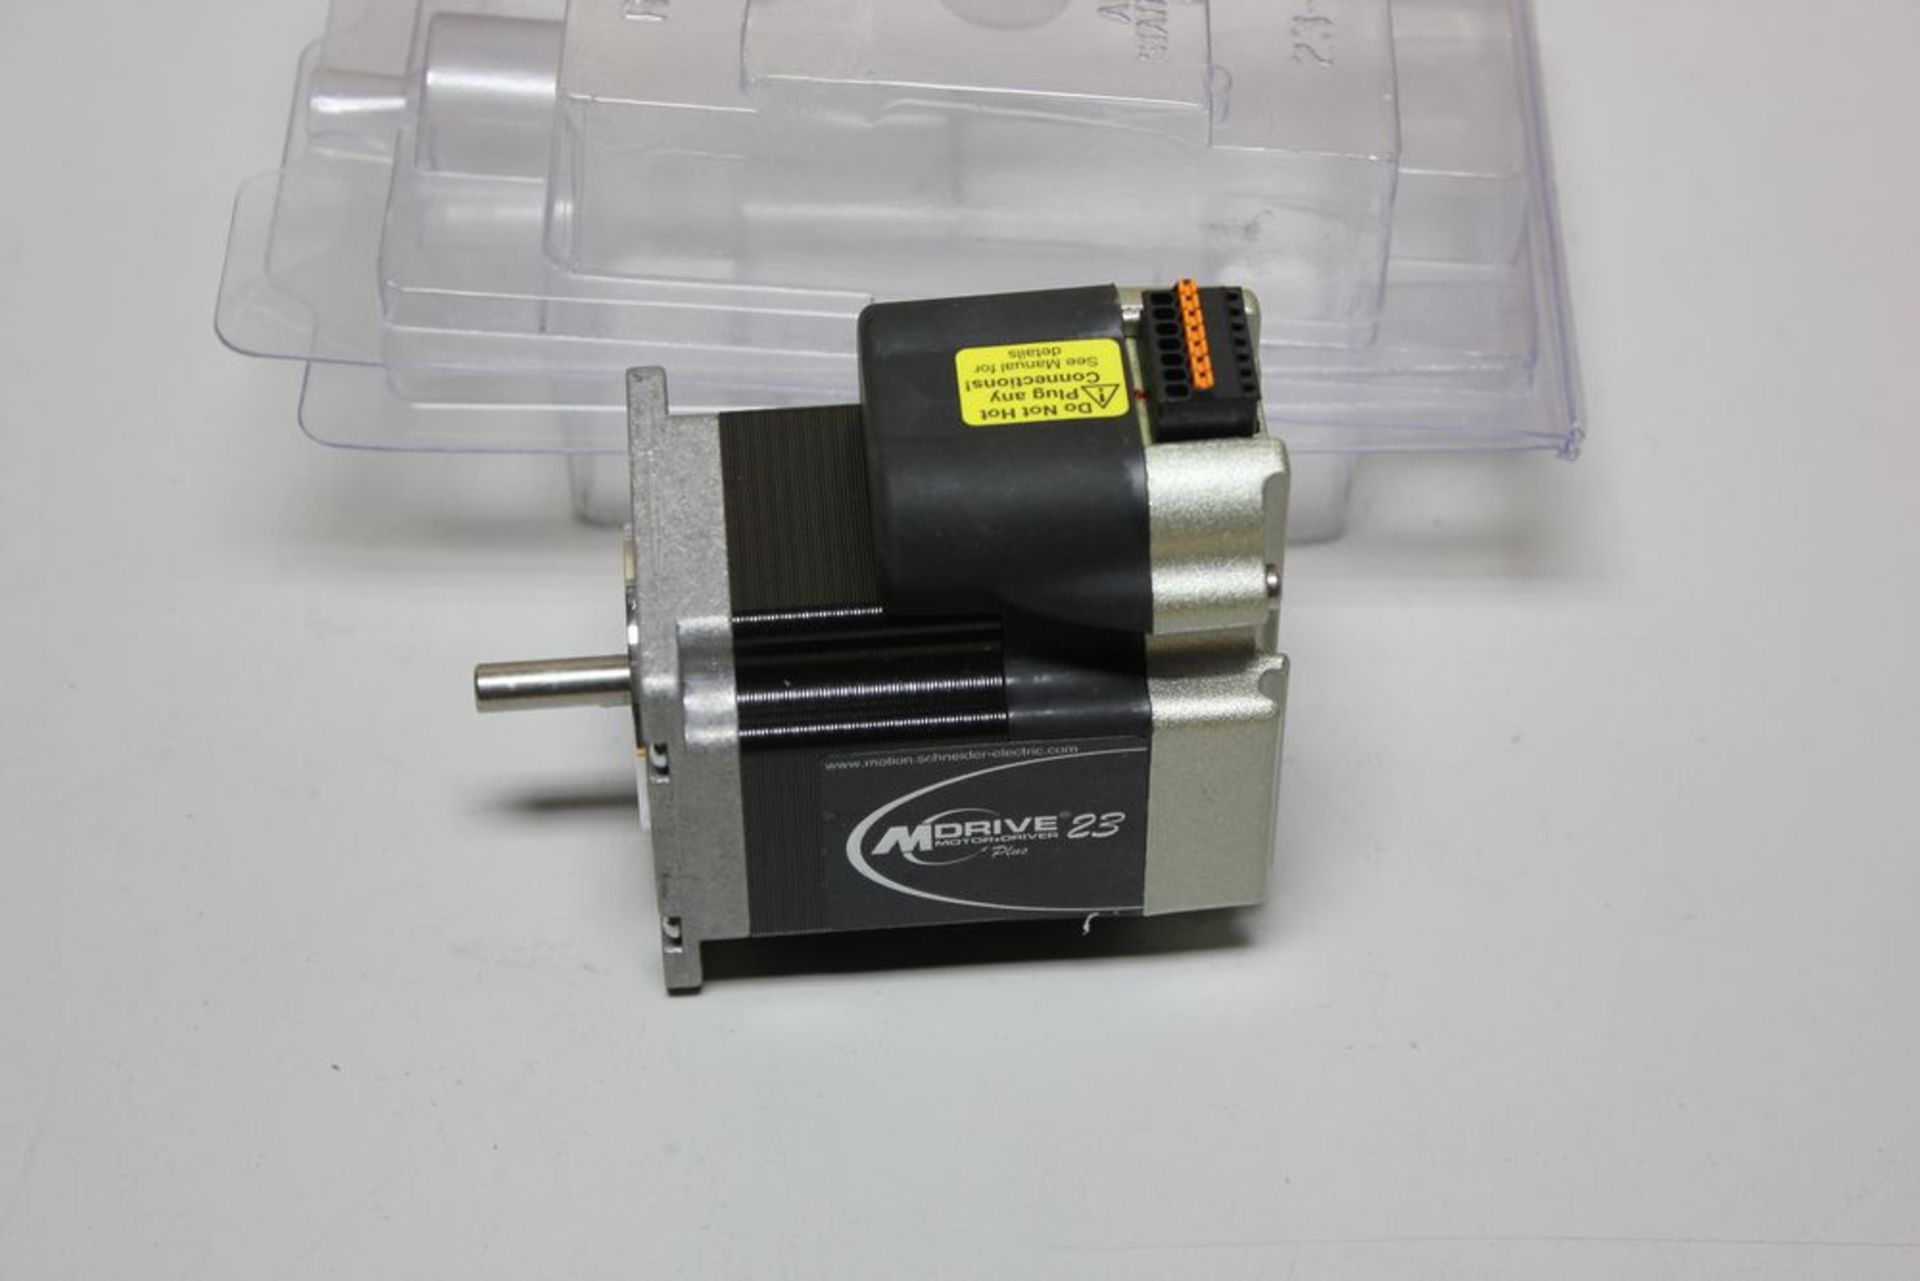 NEW SCHNEIDER MDRIVE 23 PLUS STEPPER MOTOR & DRIVE - Image 2 of 5